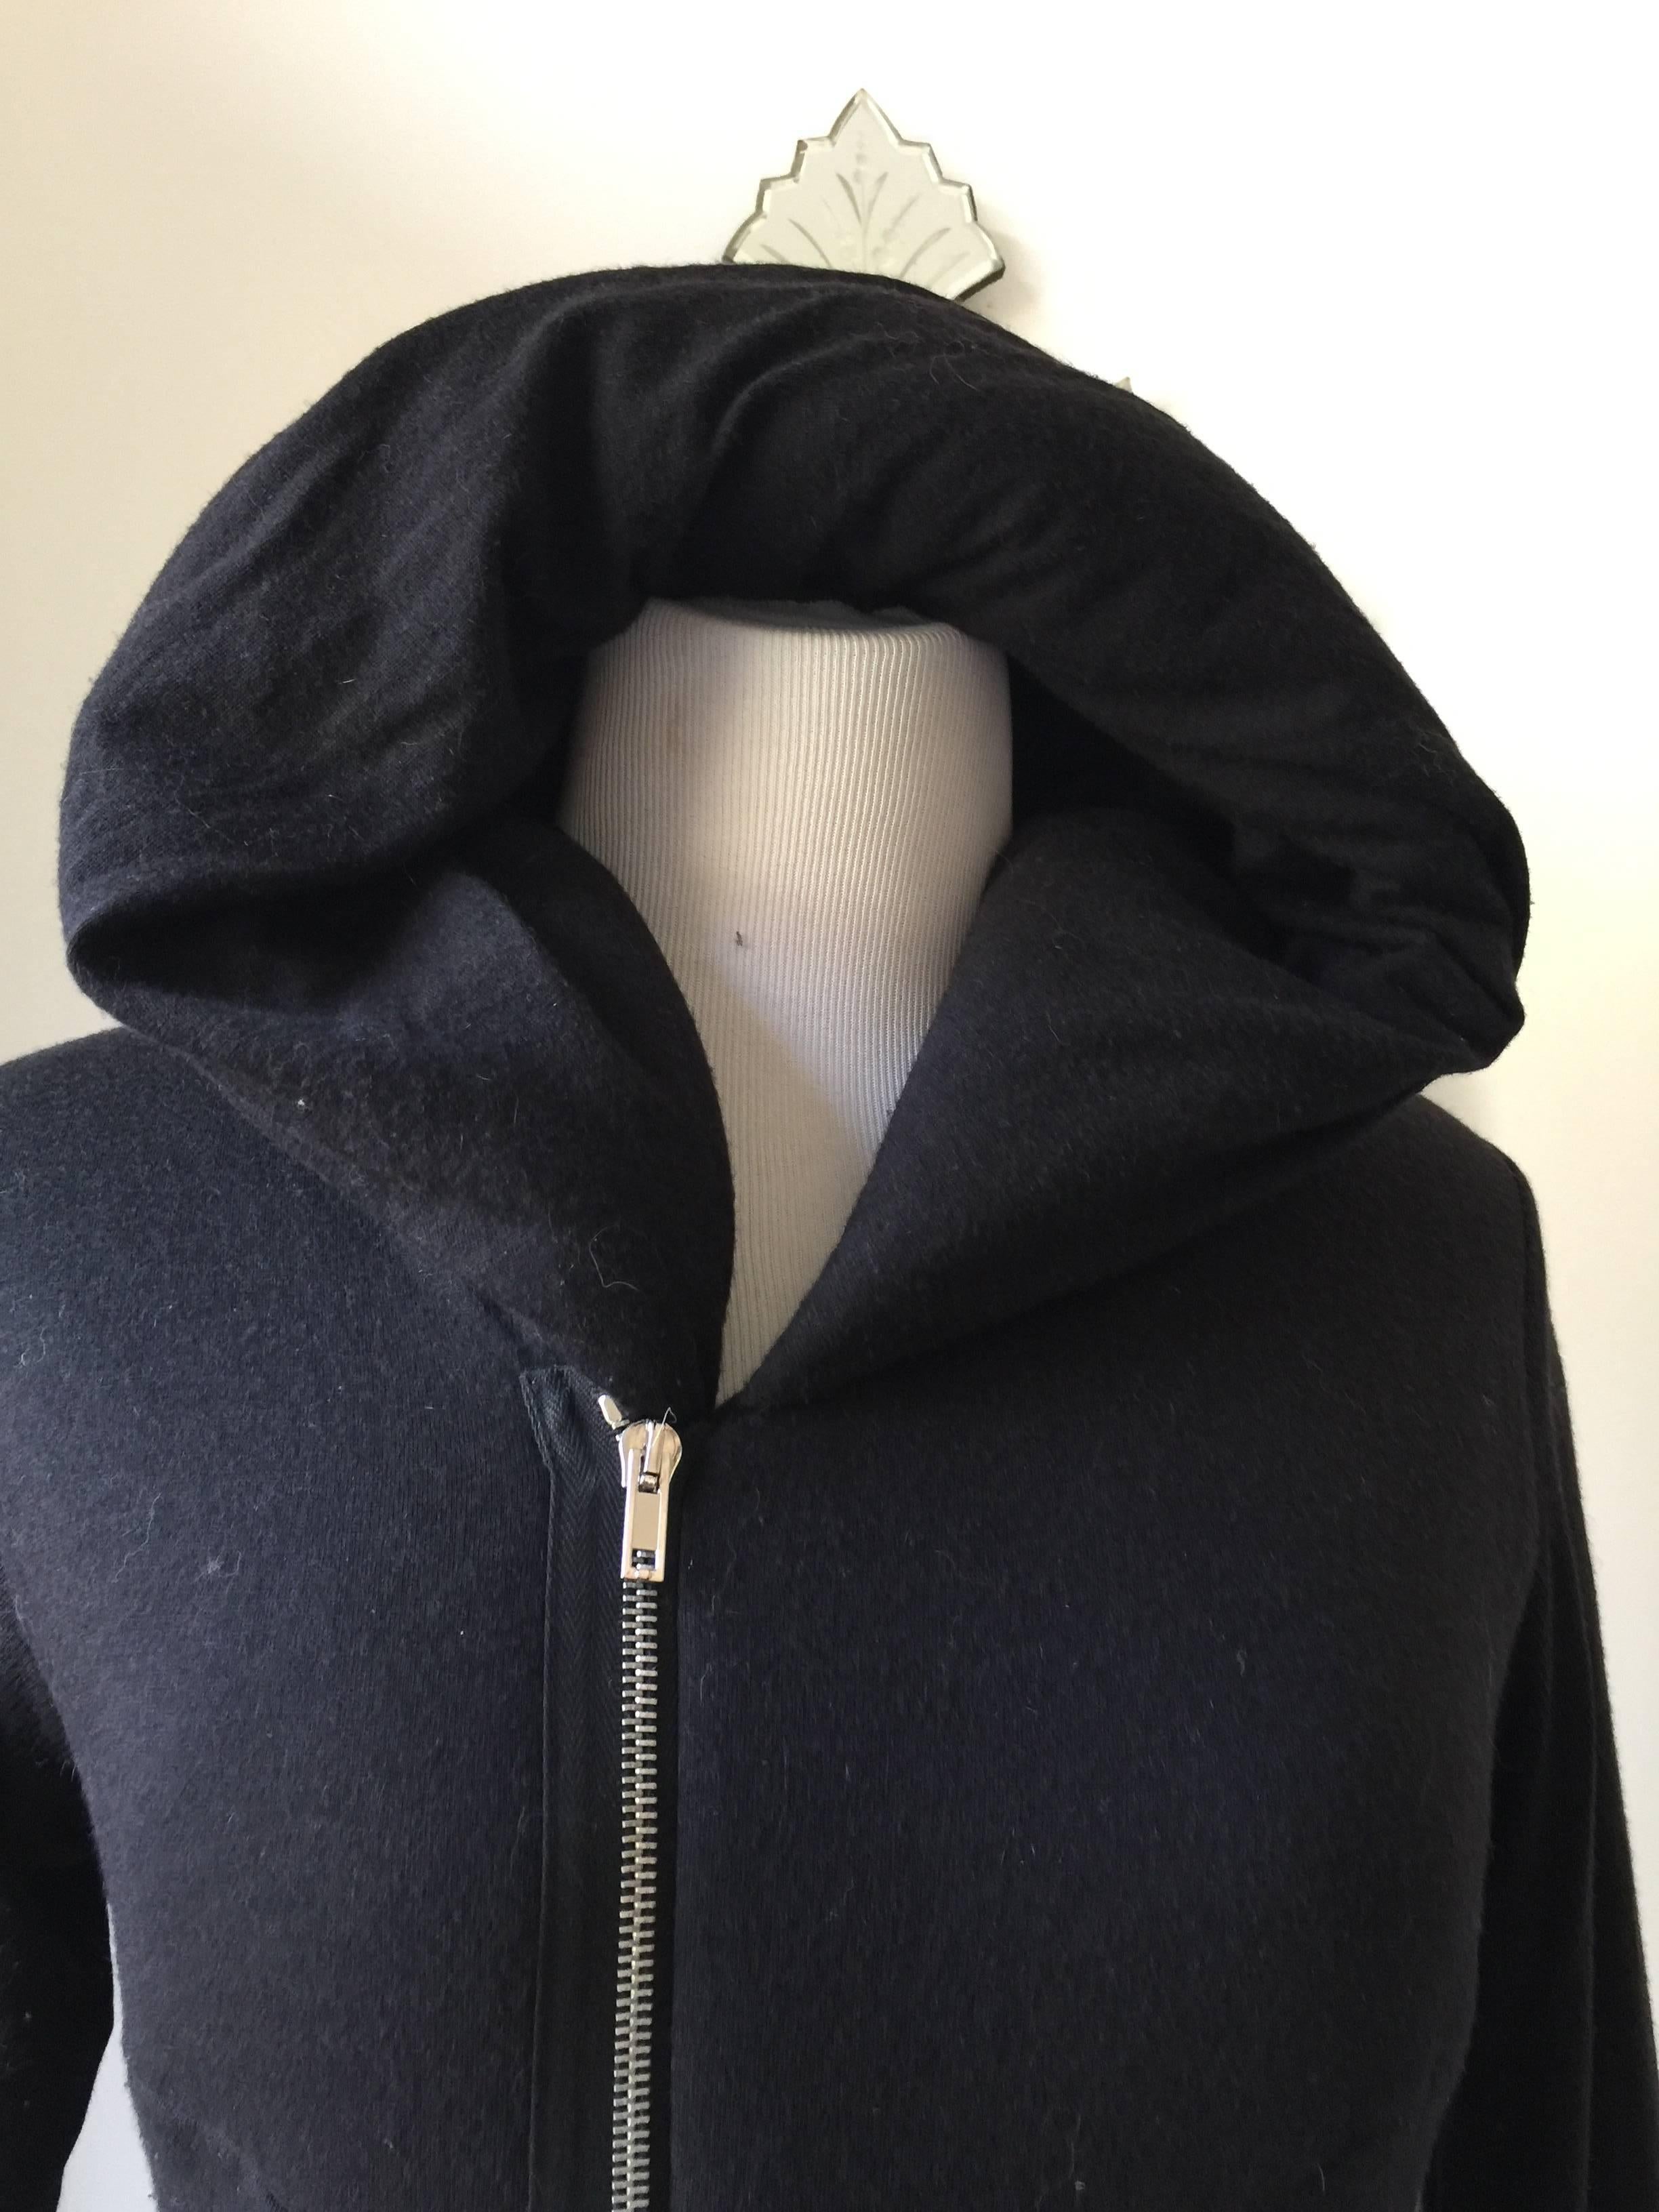 Rick Owens Hooded Top padded with asymetrical zipper with 2 
slanted pockets